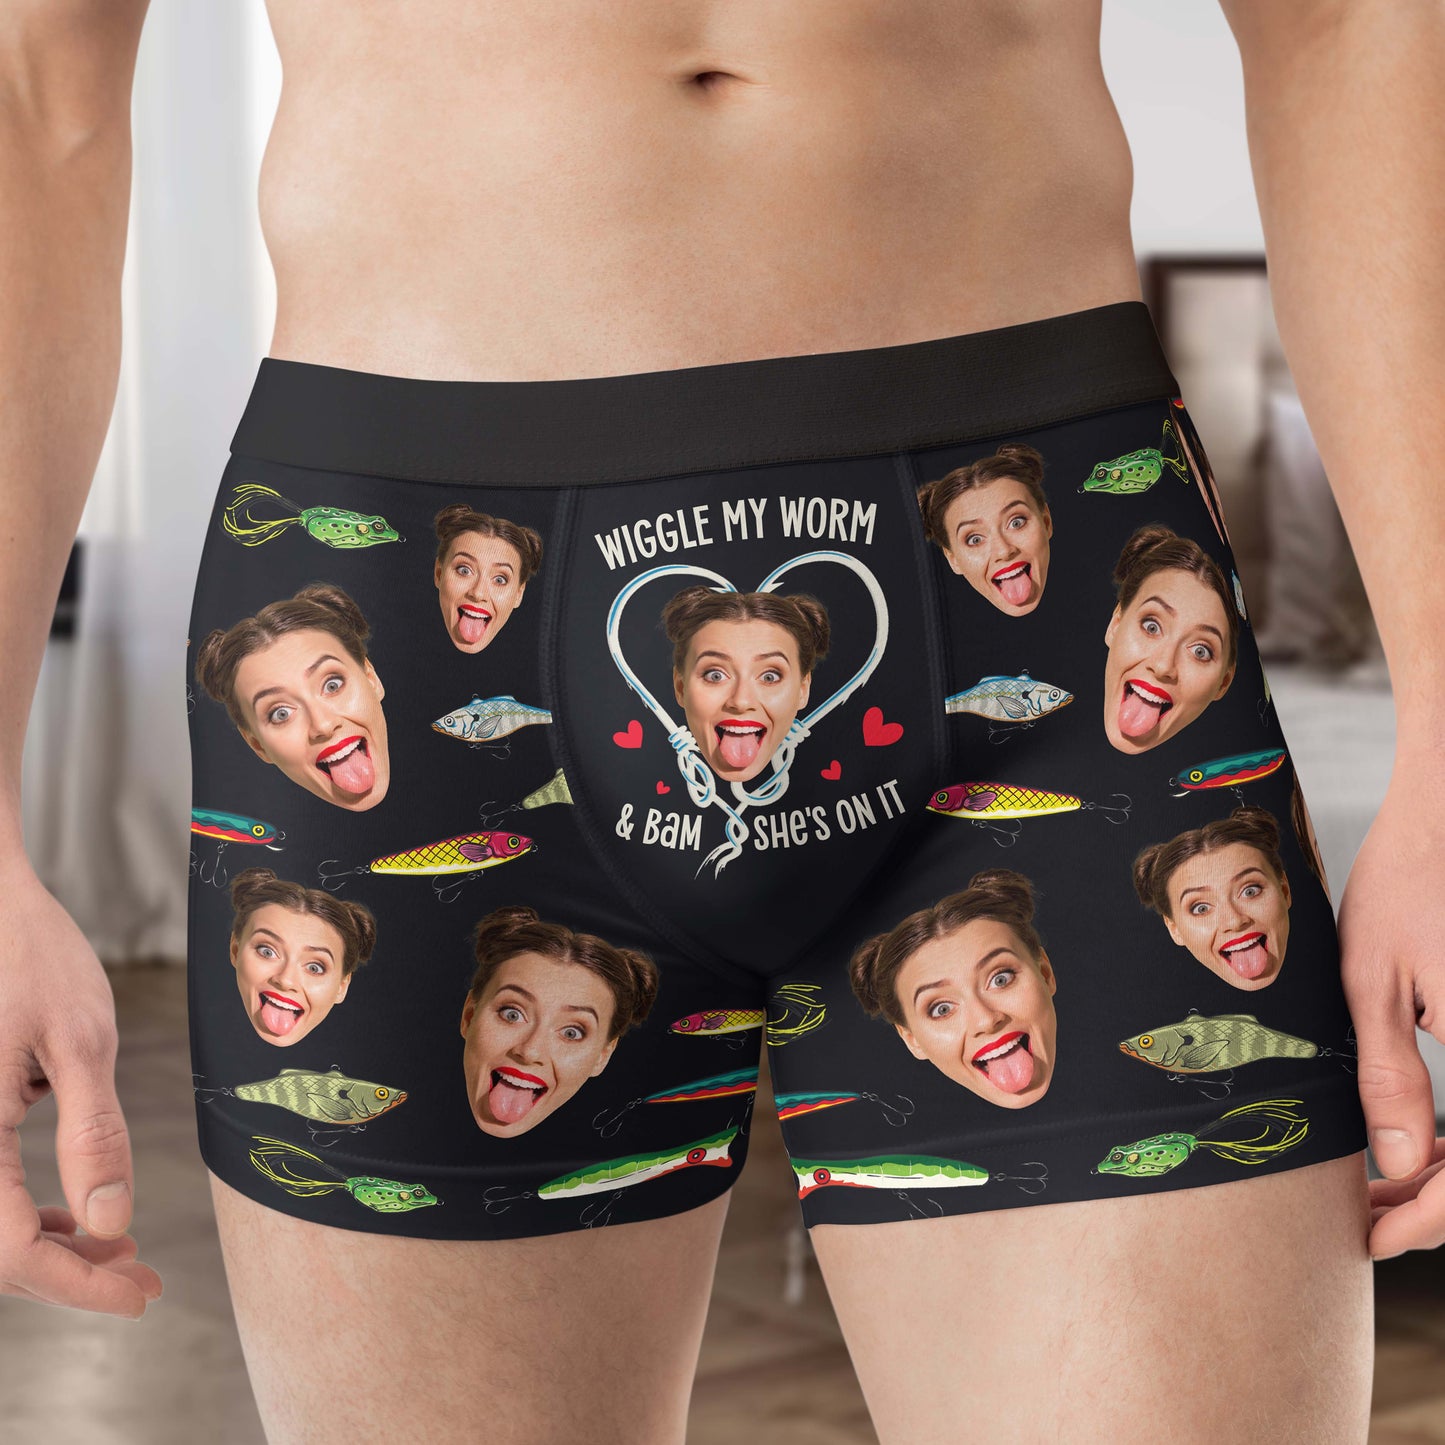 Wiggle My Worm & Bam She's On It - Personalized Photo Men's Boxer Briefs